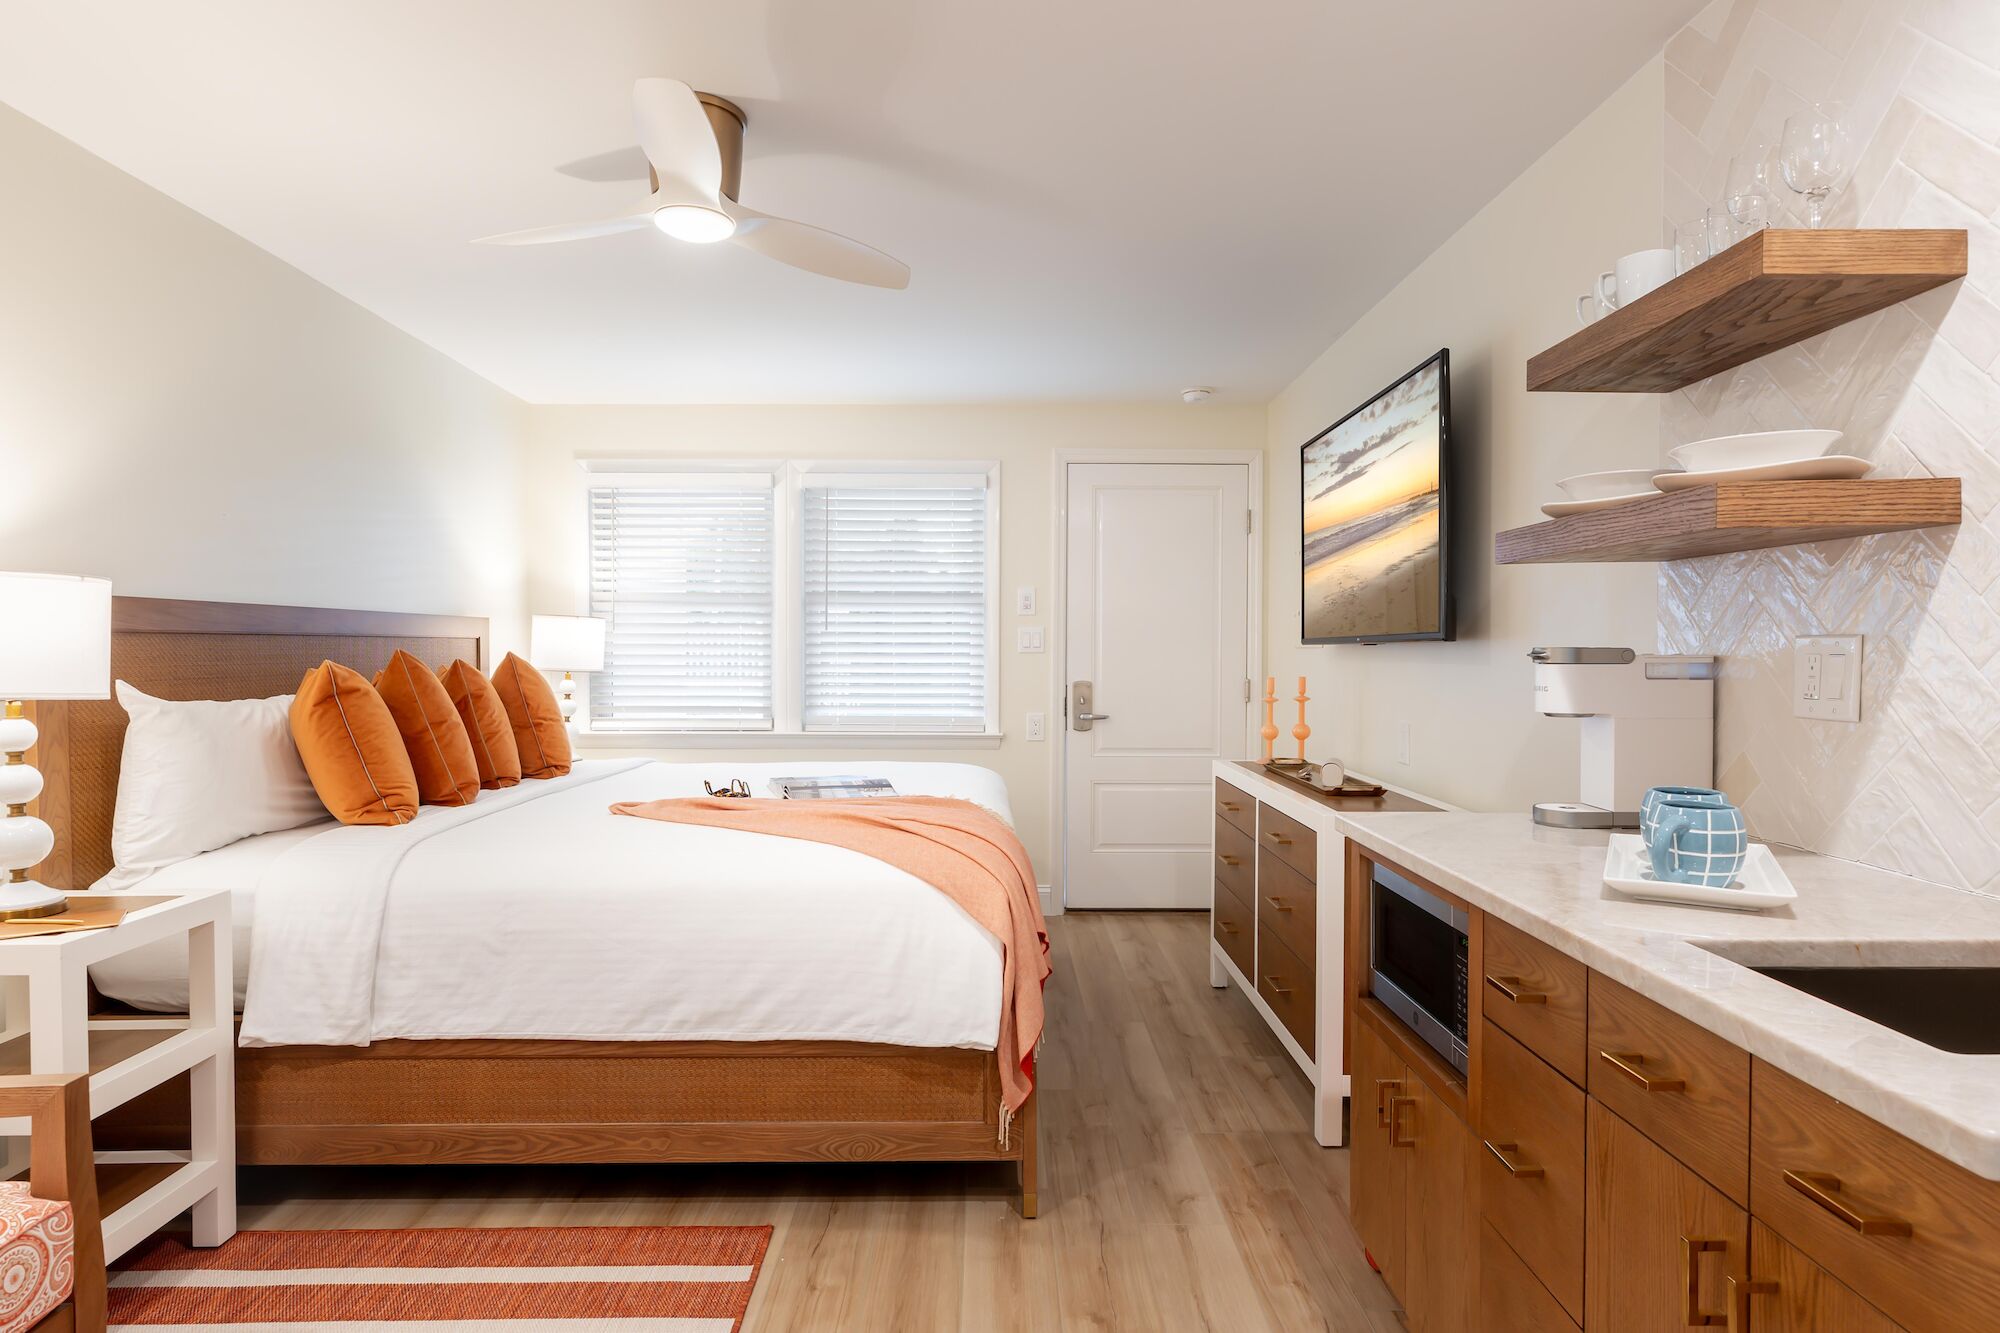 A modern, cozy bedroom with a large bed, orange accents, wall-mounted TV, ceiling fan, and a compact kitchenette area.